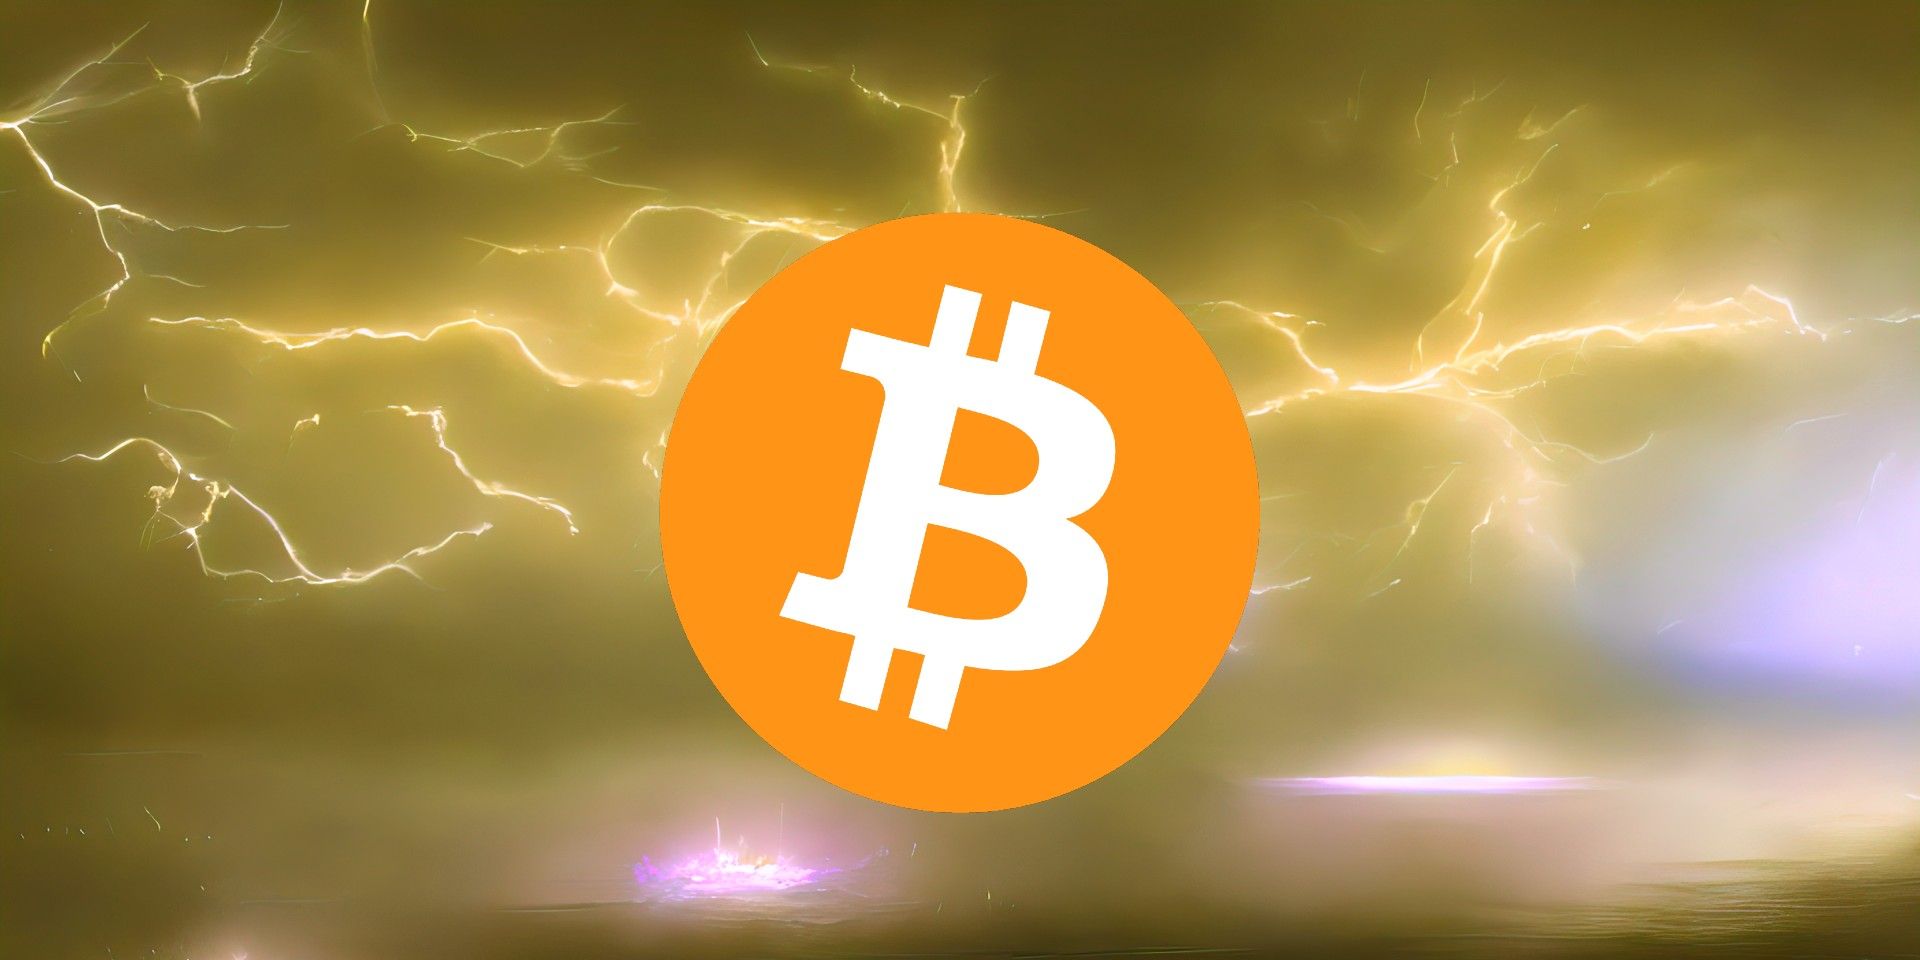 What Is The Bitcoin Lightning Network?